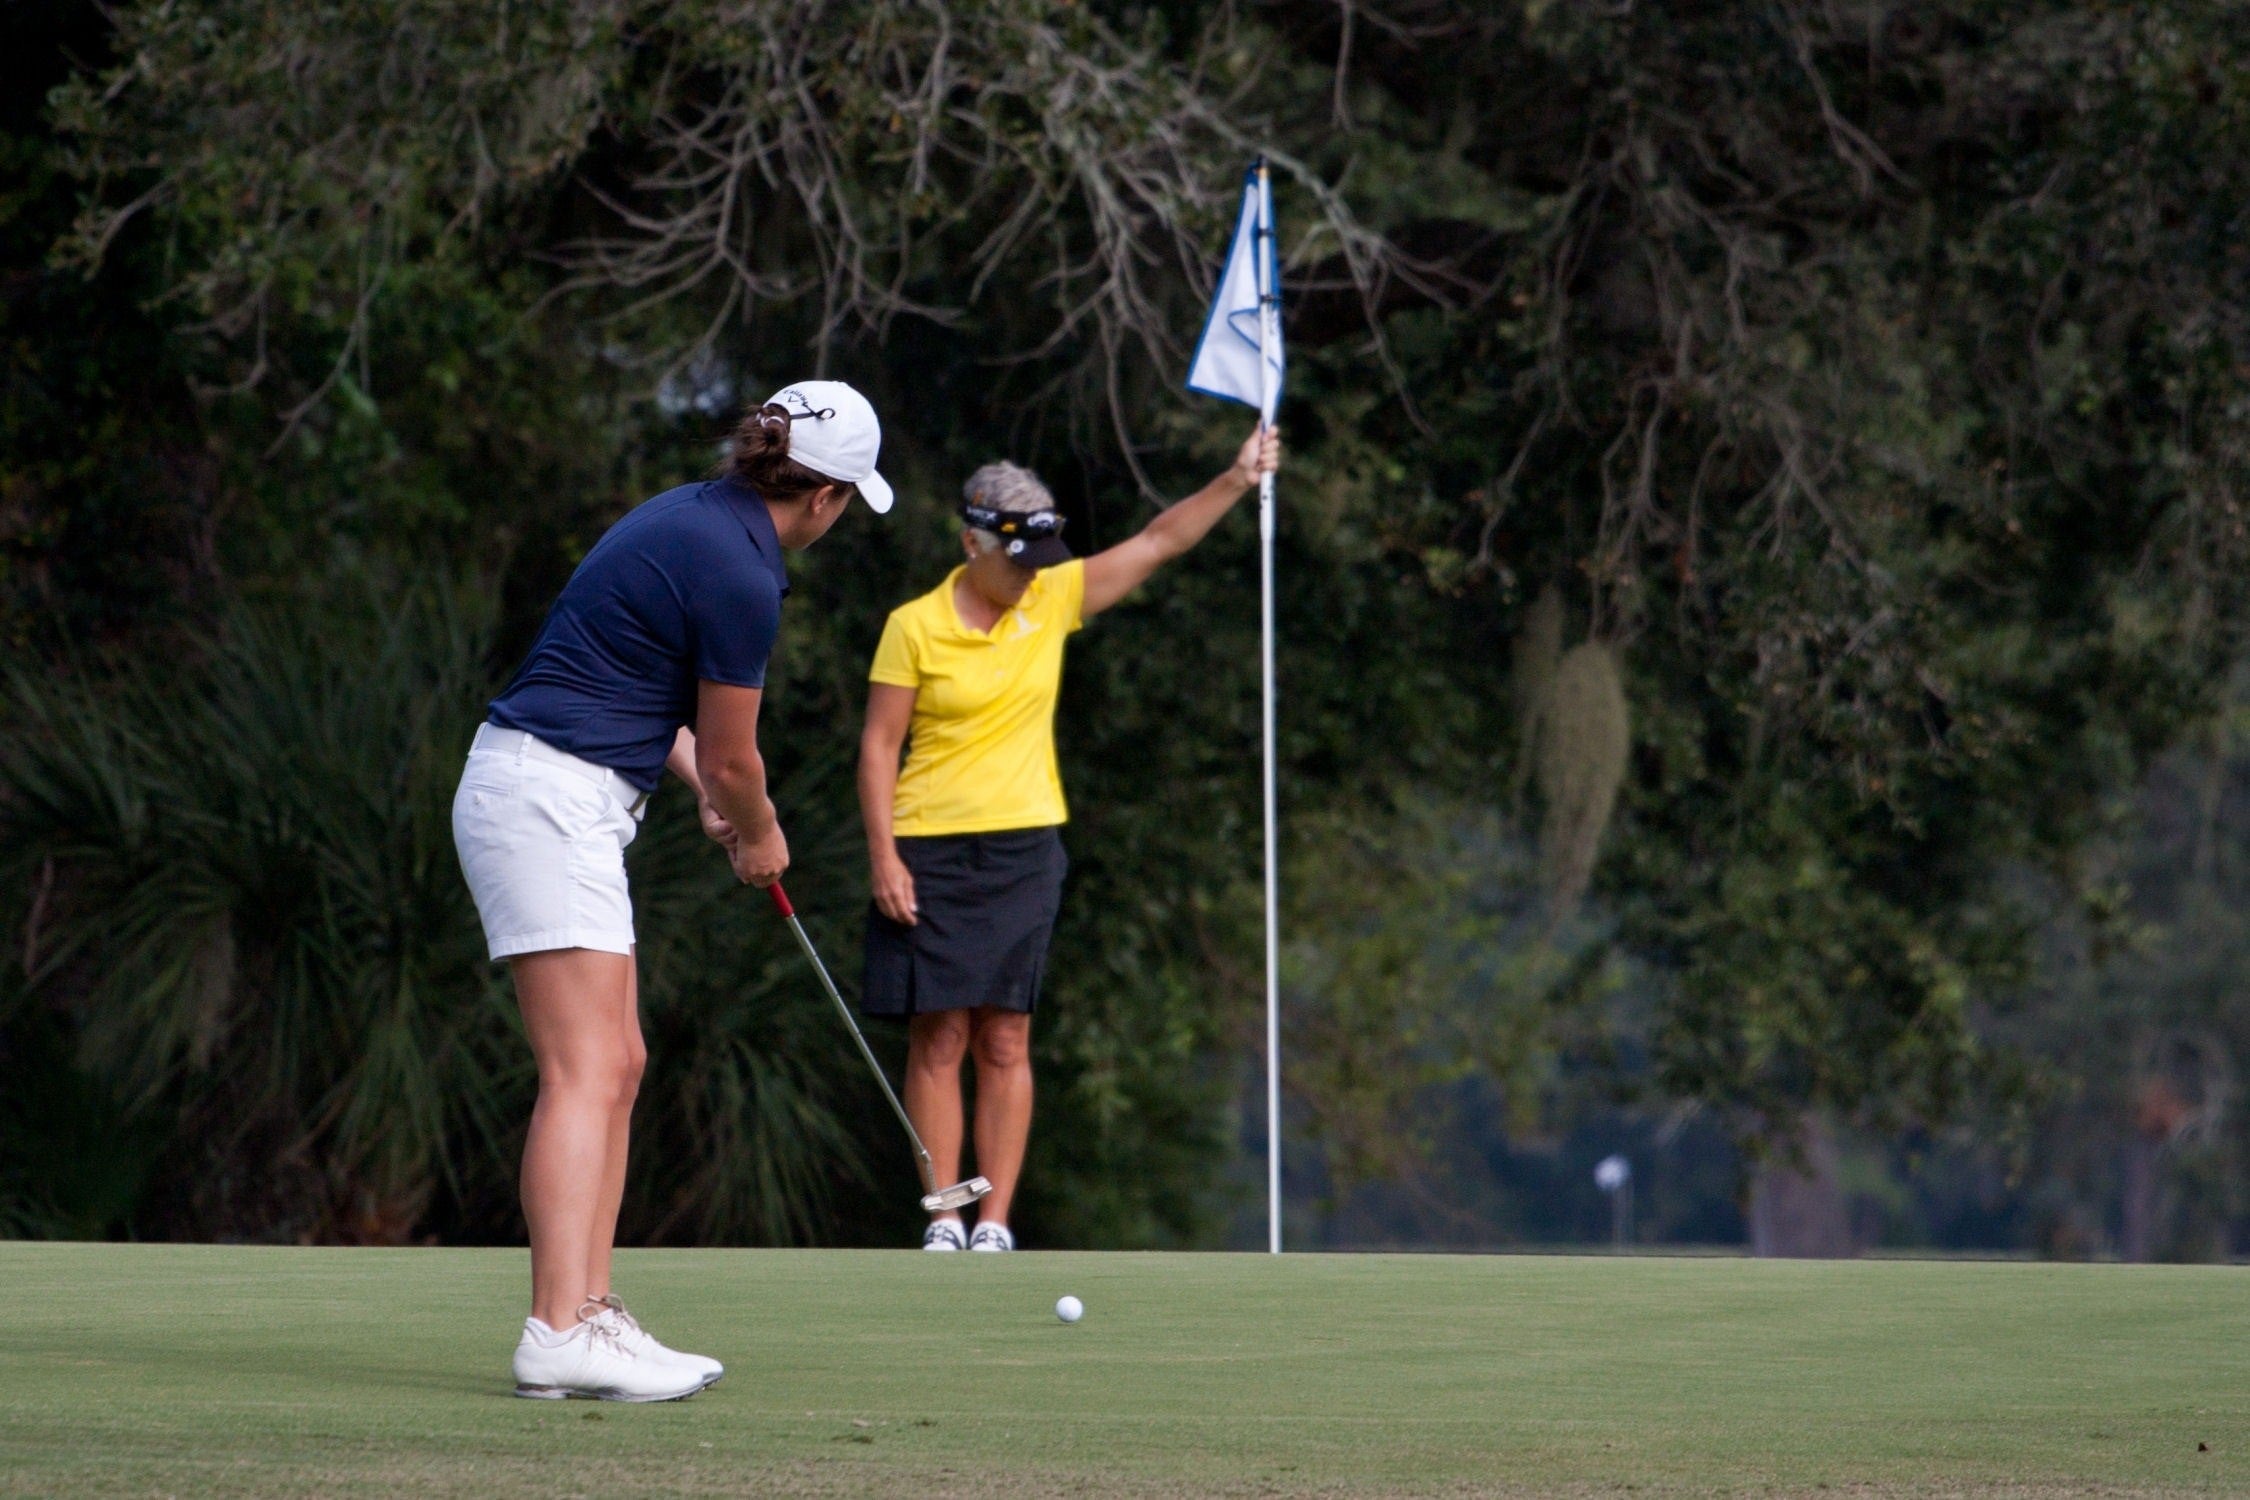 woman putting golf ball while the other woman holds the flag